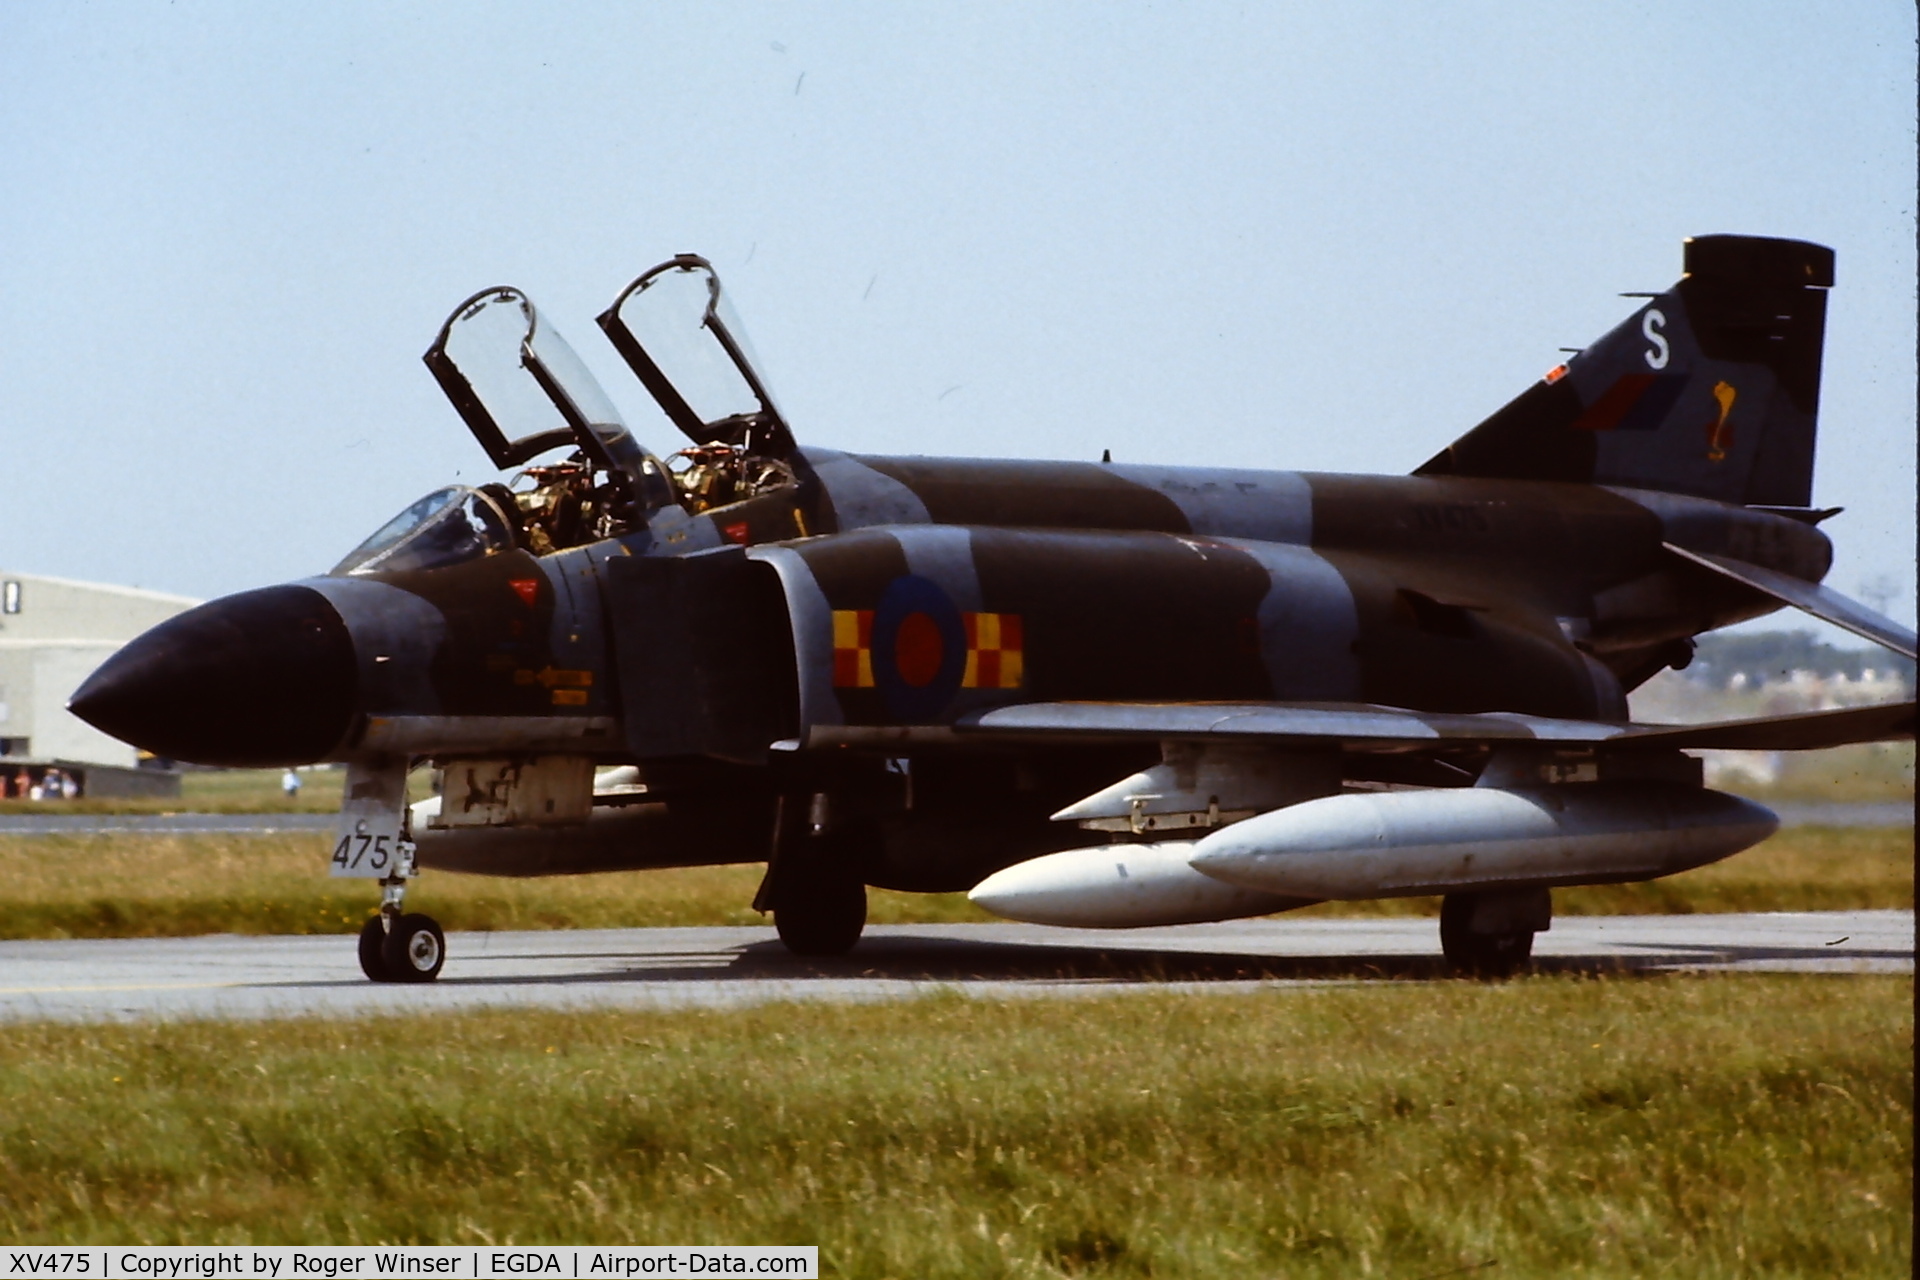 XV475, 1969 McDonnell Douglas Phantom FGR2 C/N 3314/0090, Coded S of 92 Squadron RAF on display at a RAF Brawdy Airshow in the late 1970's/early 1980's